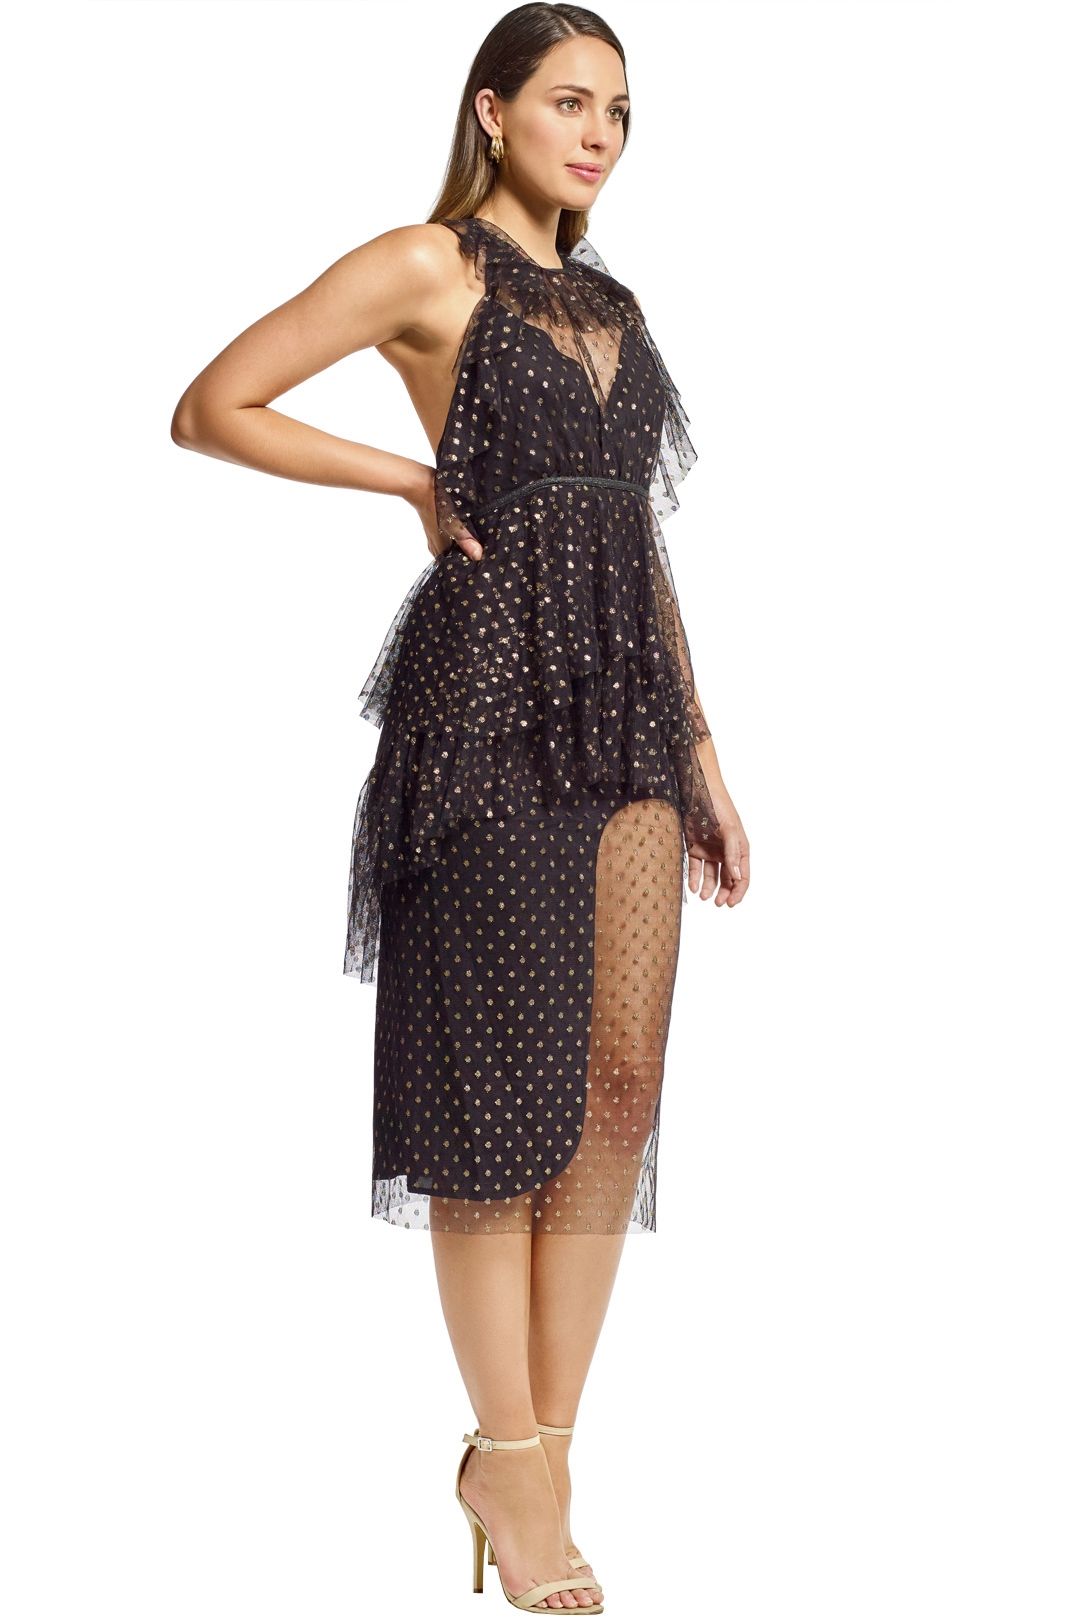 Alice McCall - You and Me Dress - Black - Side